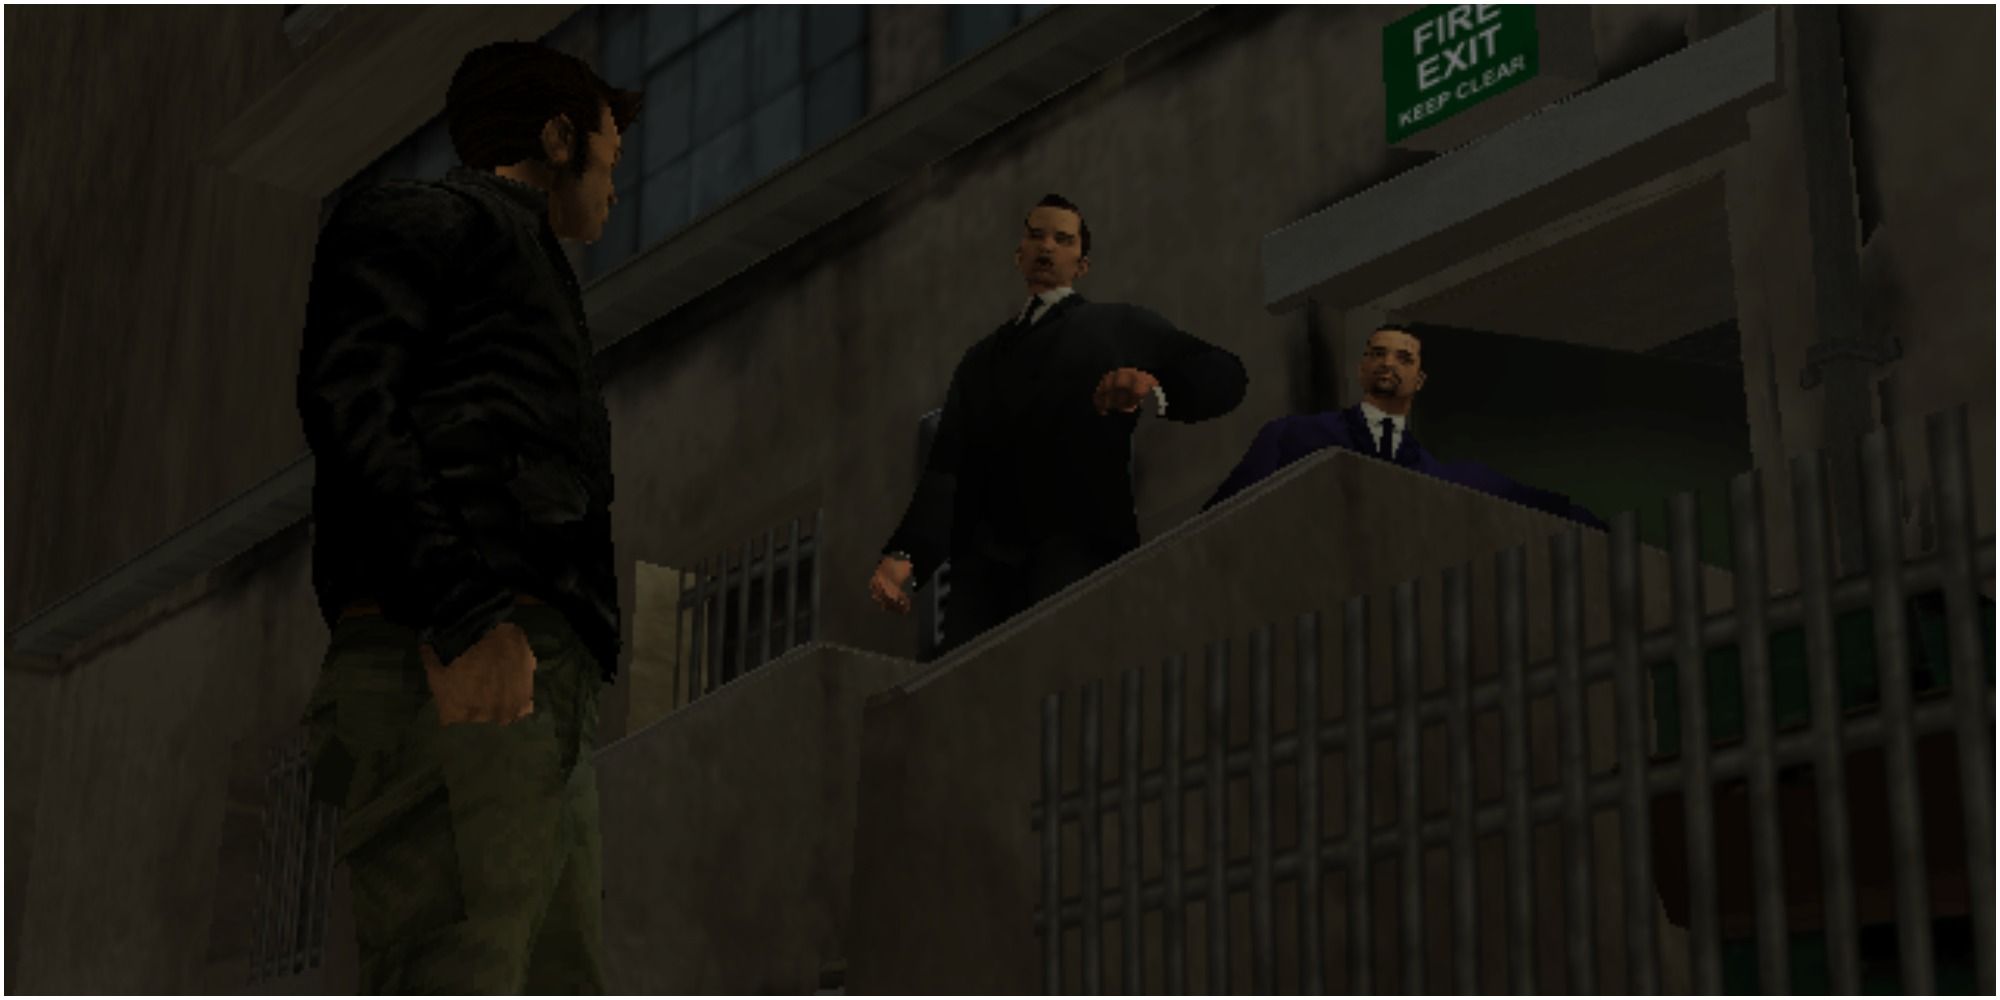 luigi giving the player in gta 3 a mission